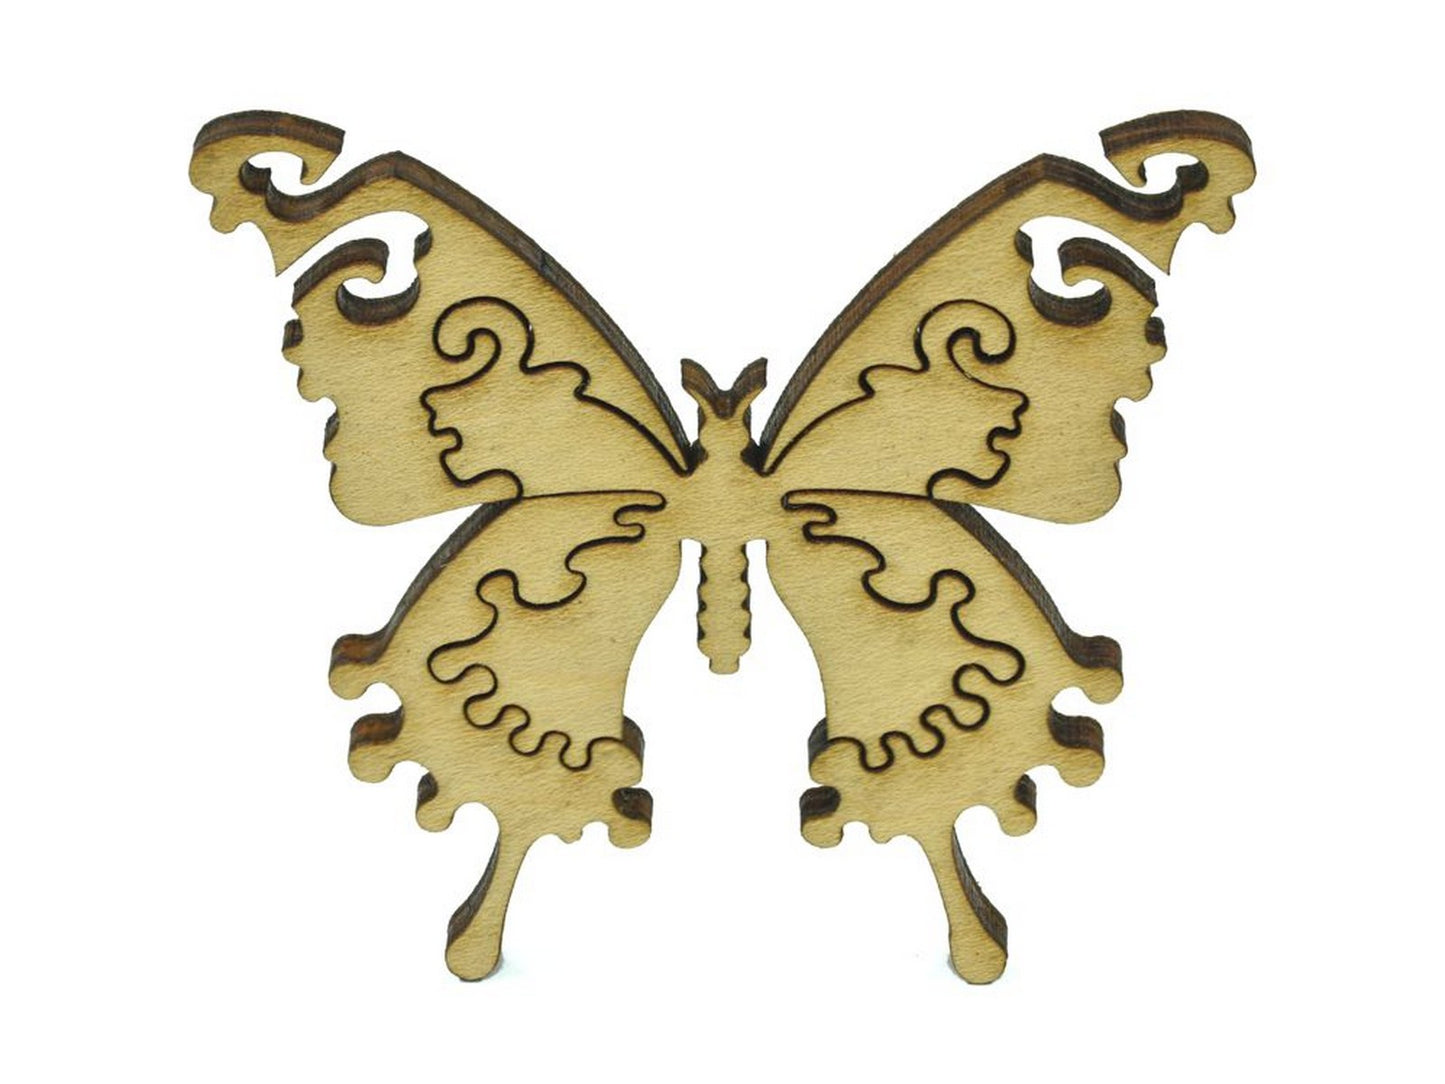 A closeup of pieces in the shape of a butterfly.